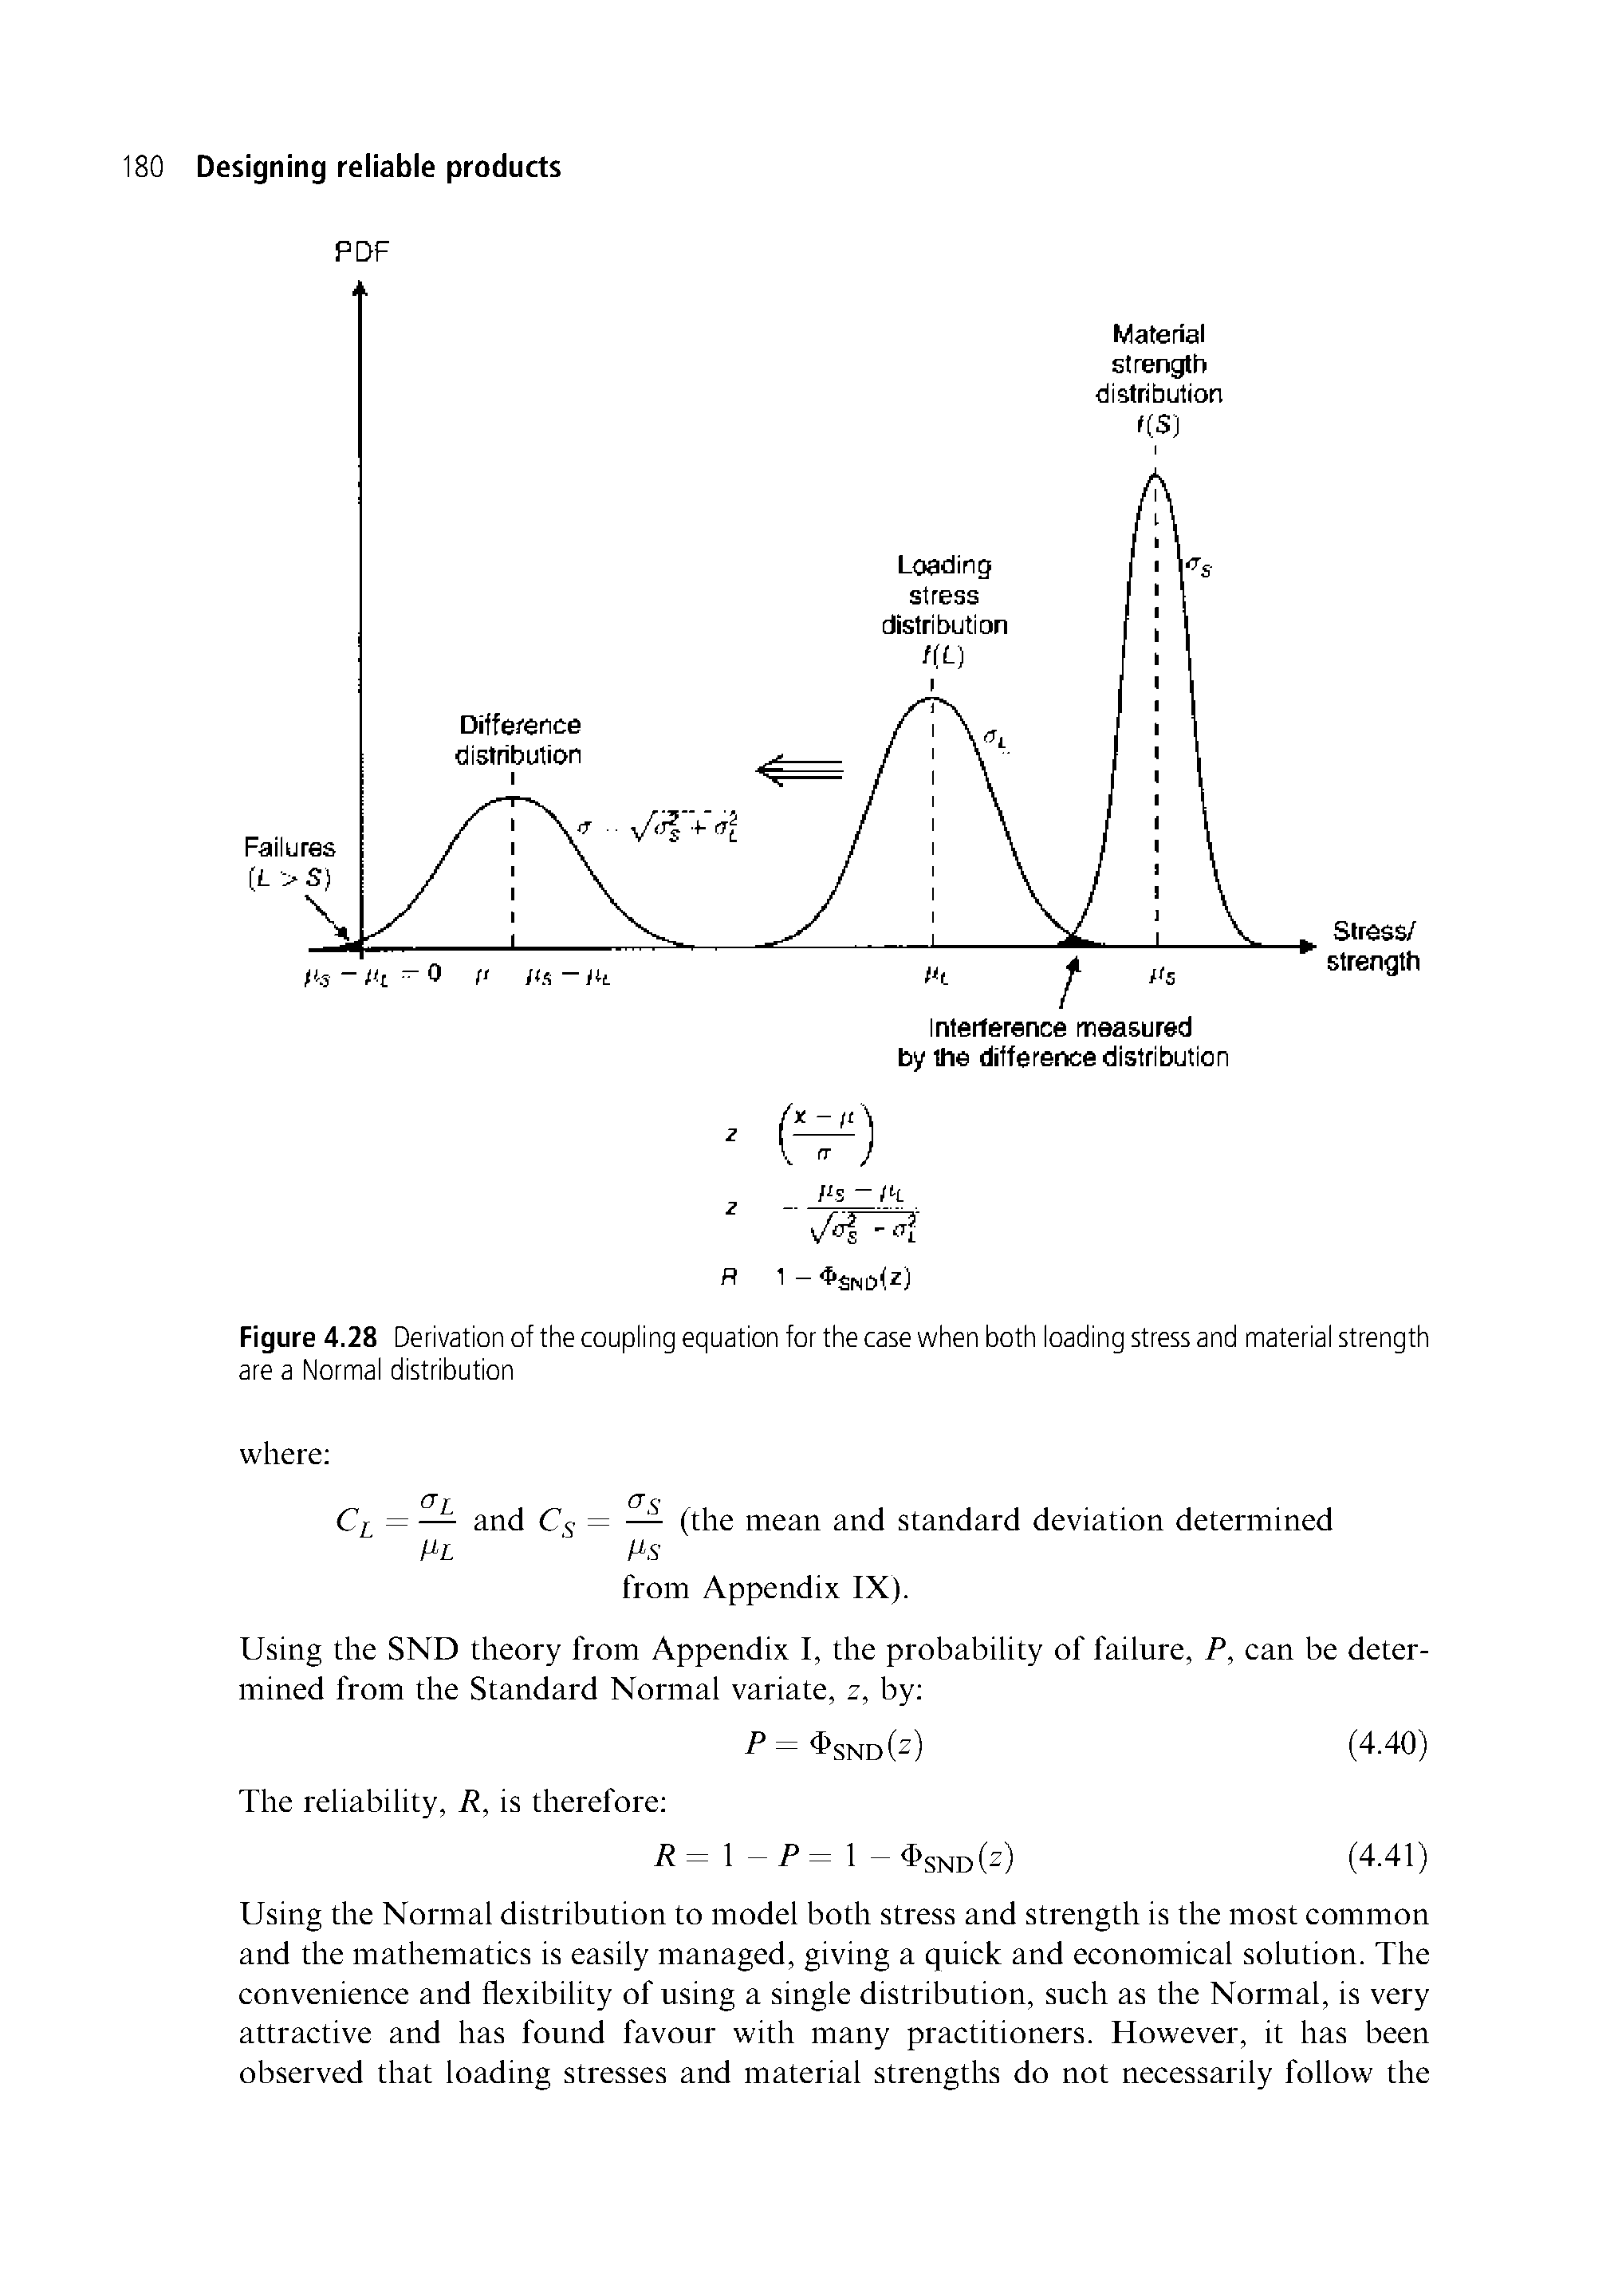 Figure 4.28 Derivation of the coupling equation for the case when both loading stress and material strength are a Normal distribution...